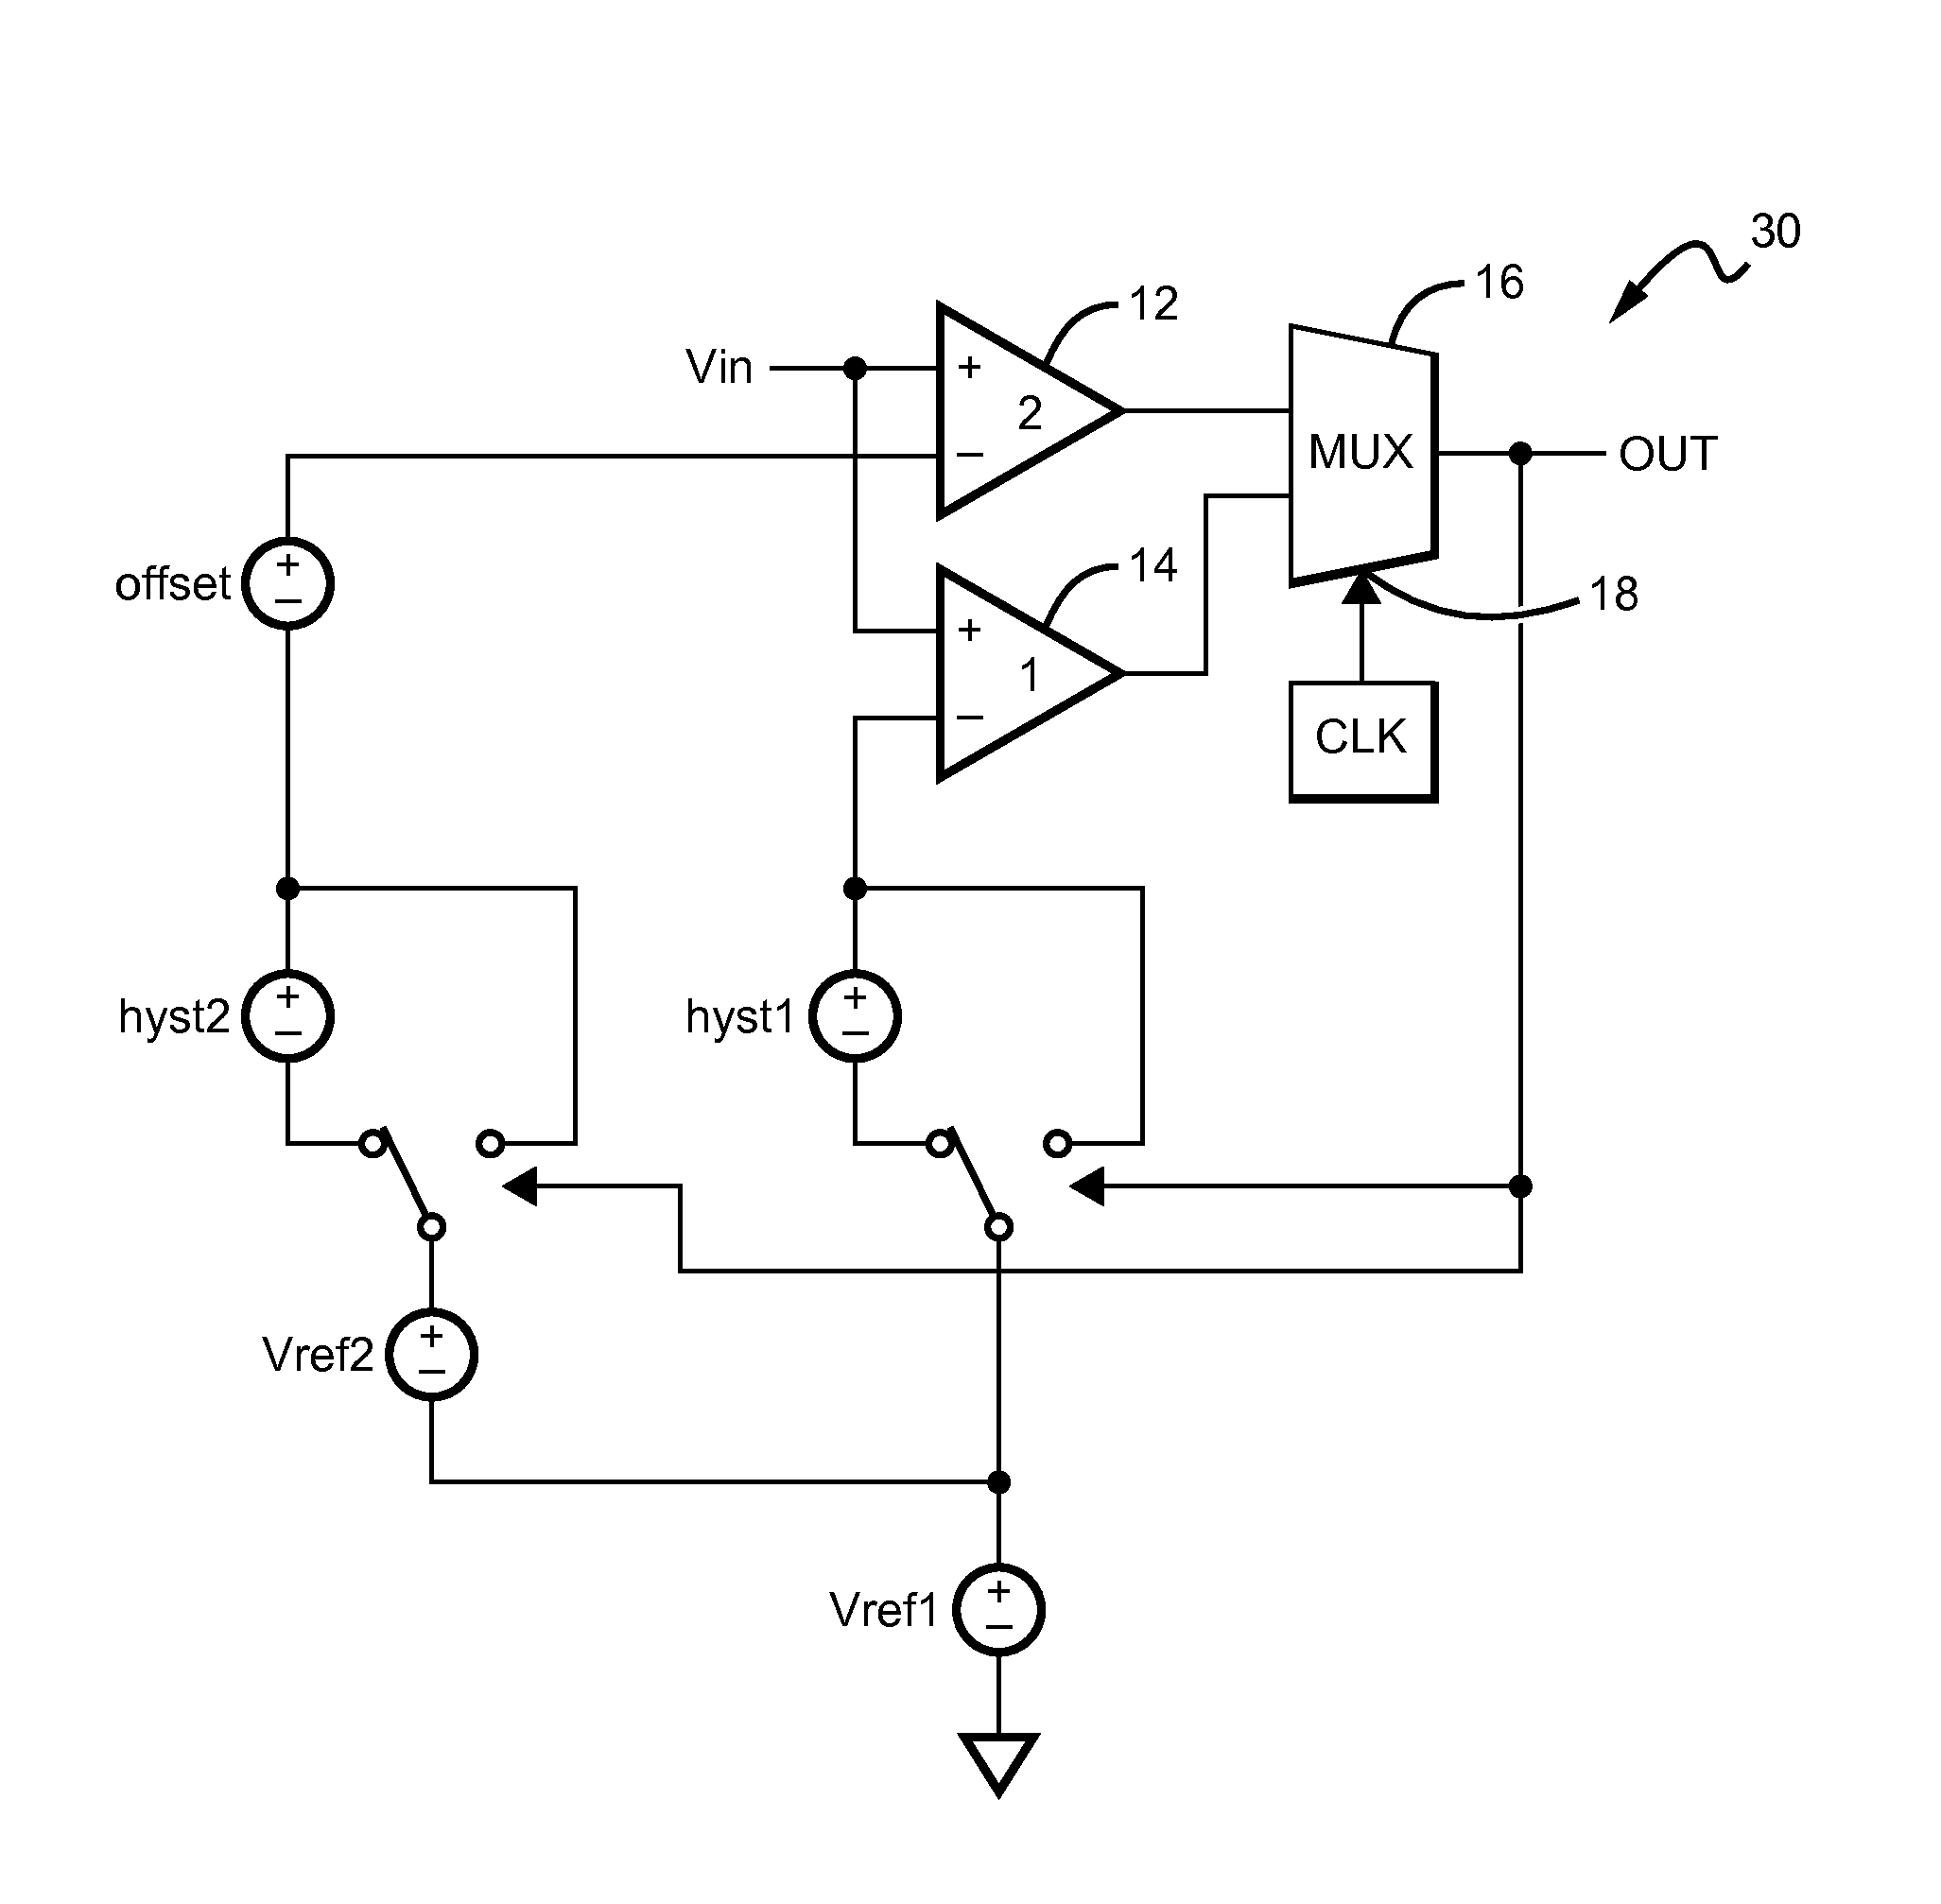 Ping pong comparator voltage monitoring circuit